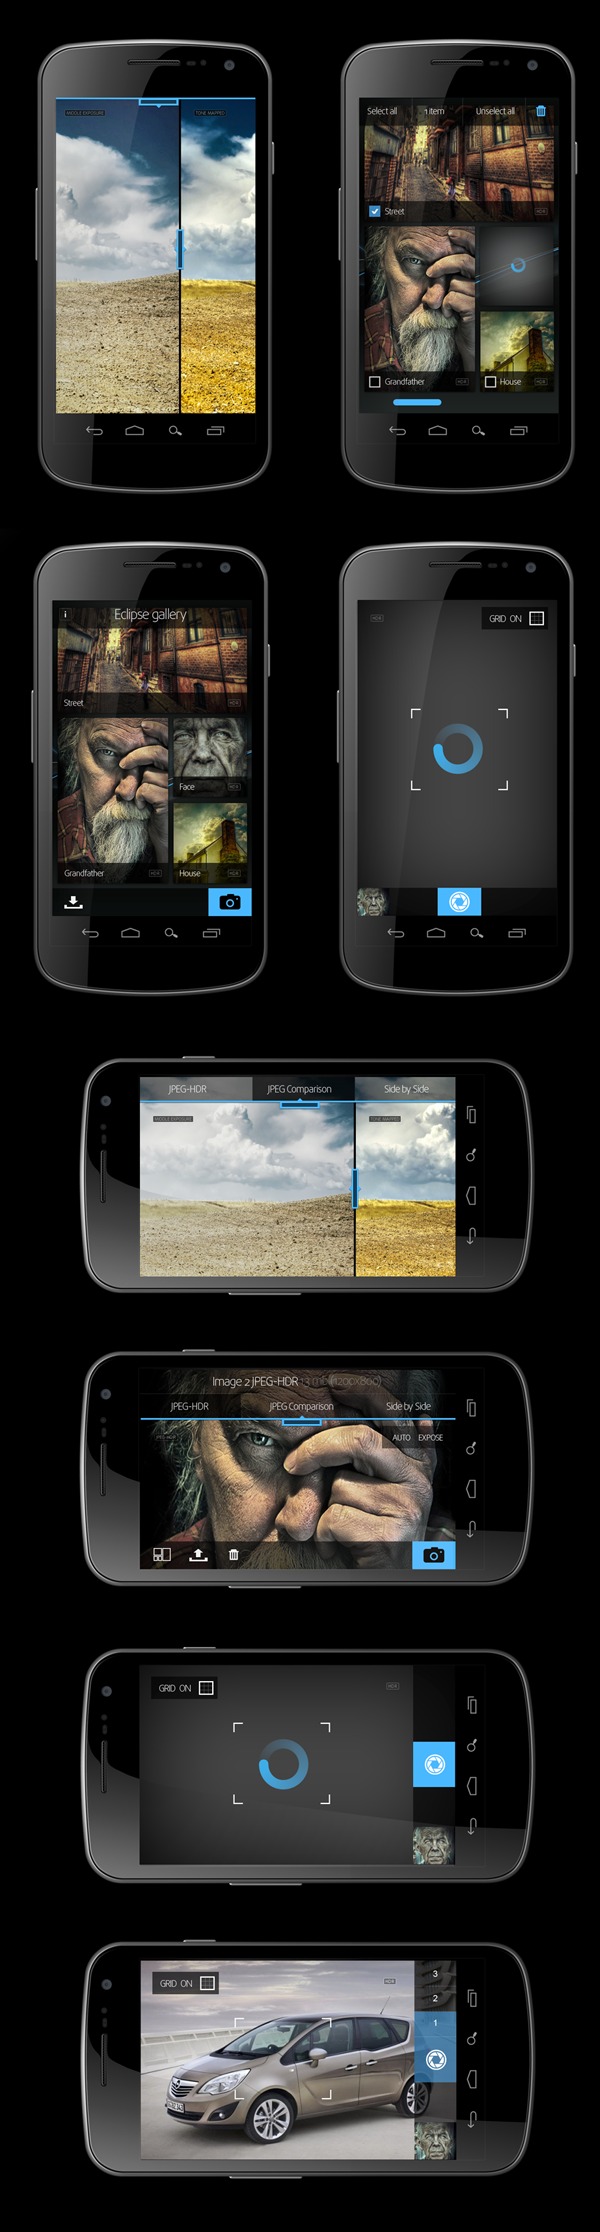 eclipse dolby smartphone app application  HDR jpg-hdr